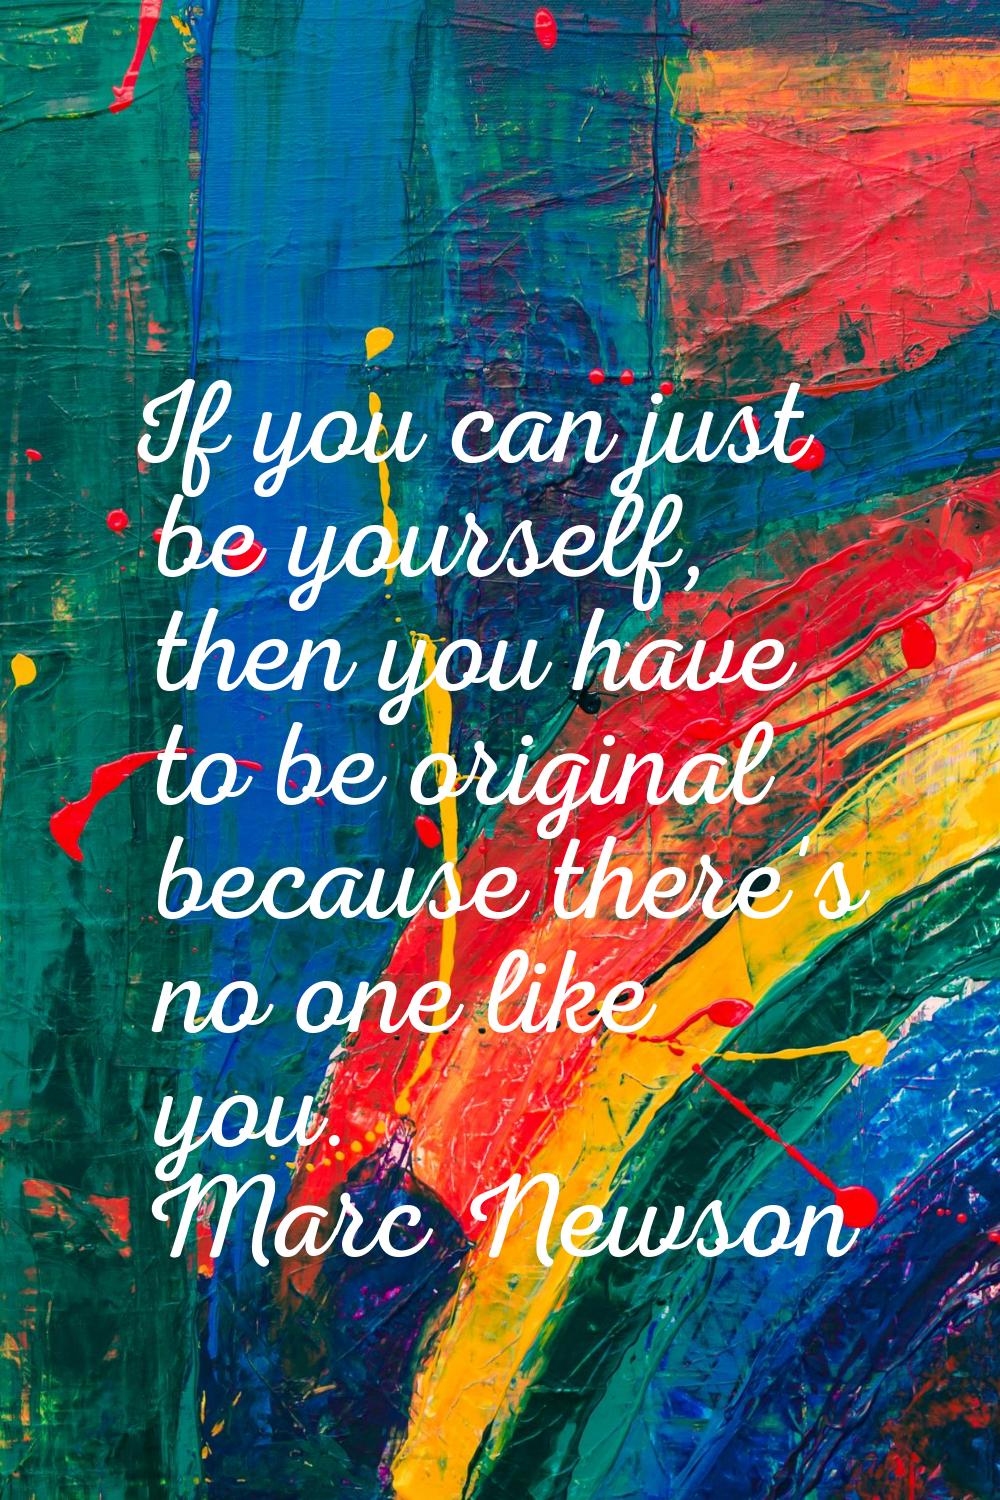 If you can just be yourself, then you have to be original because there's no one like you.